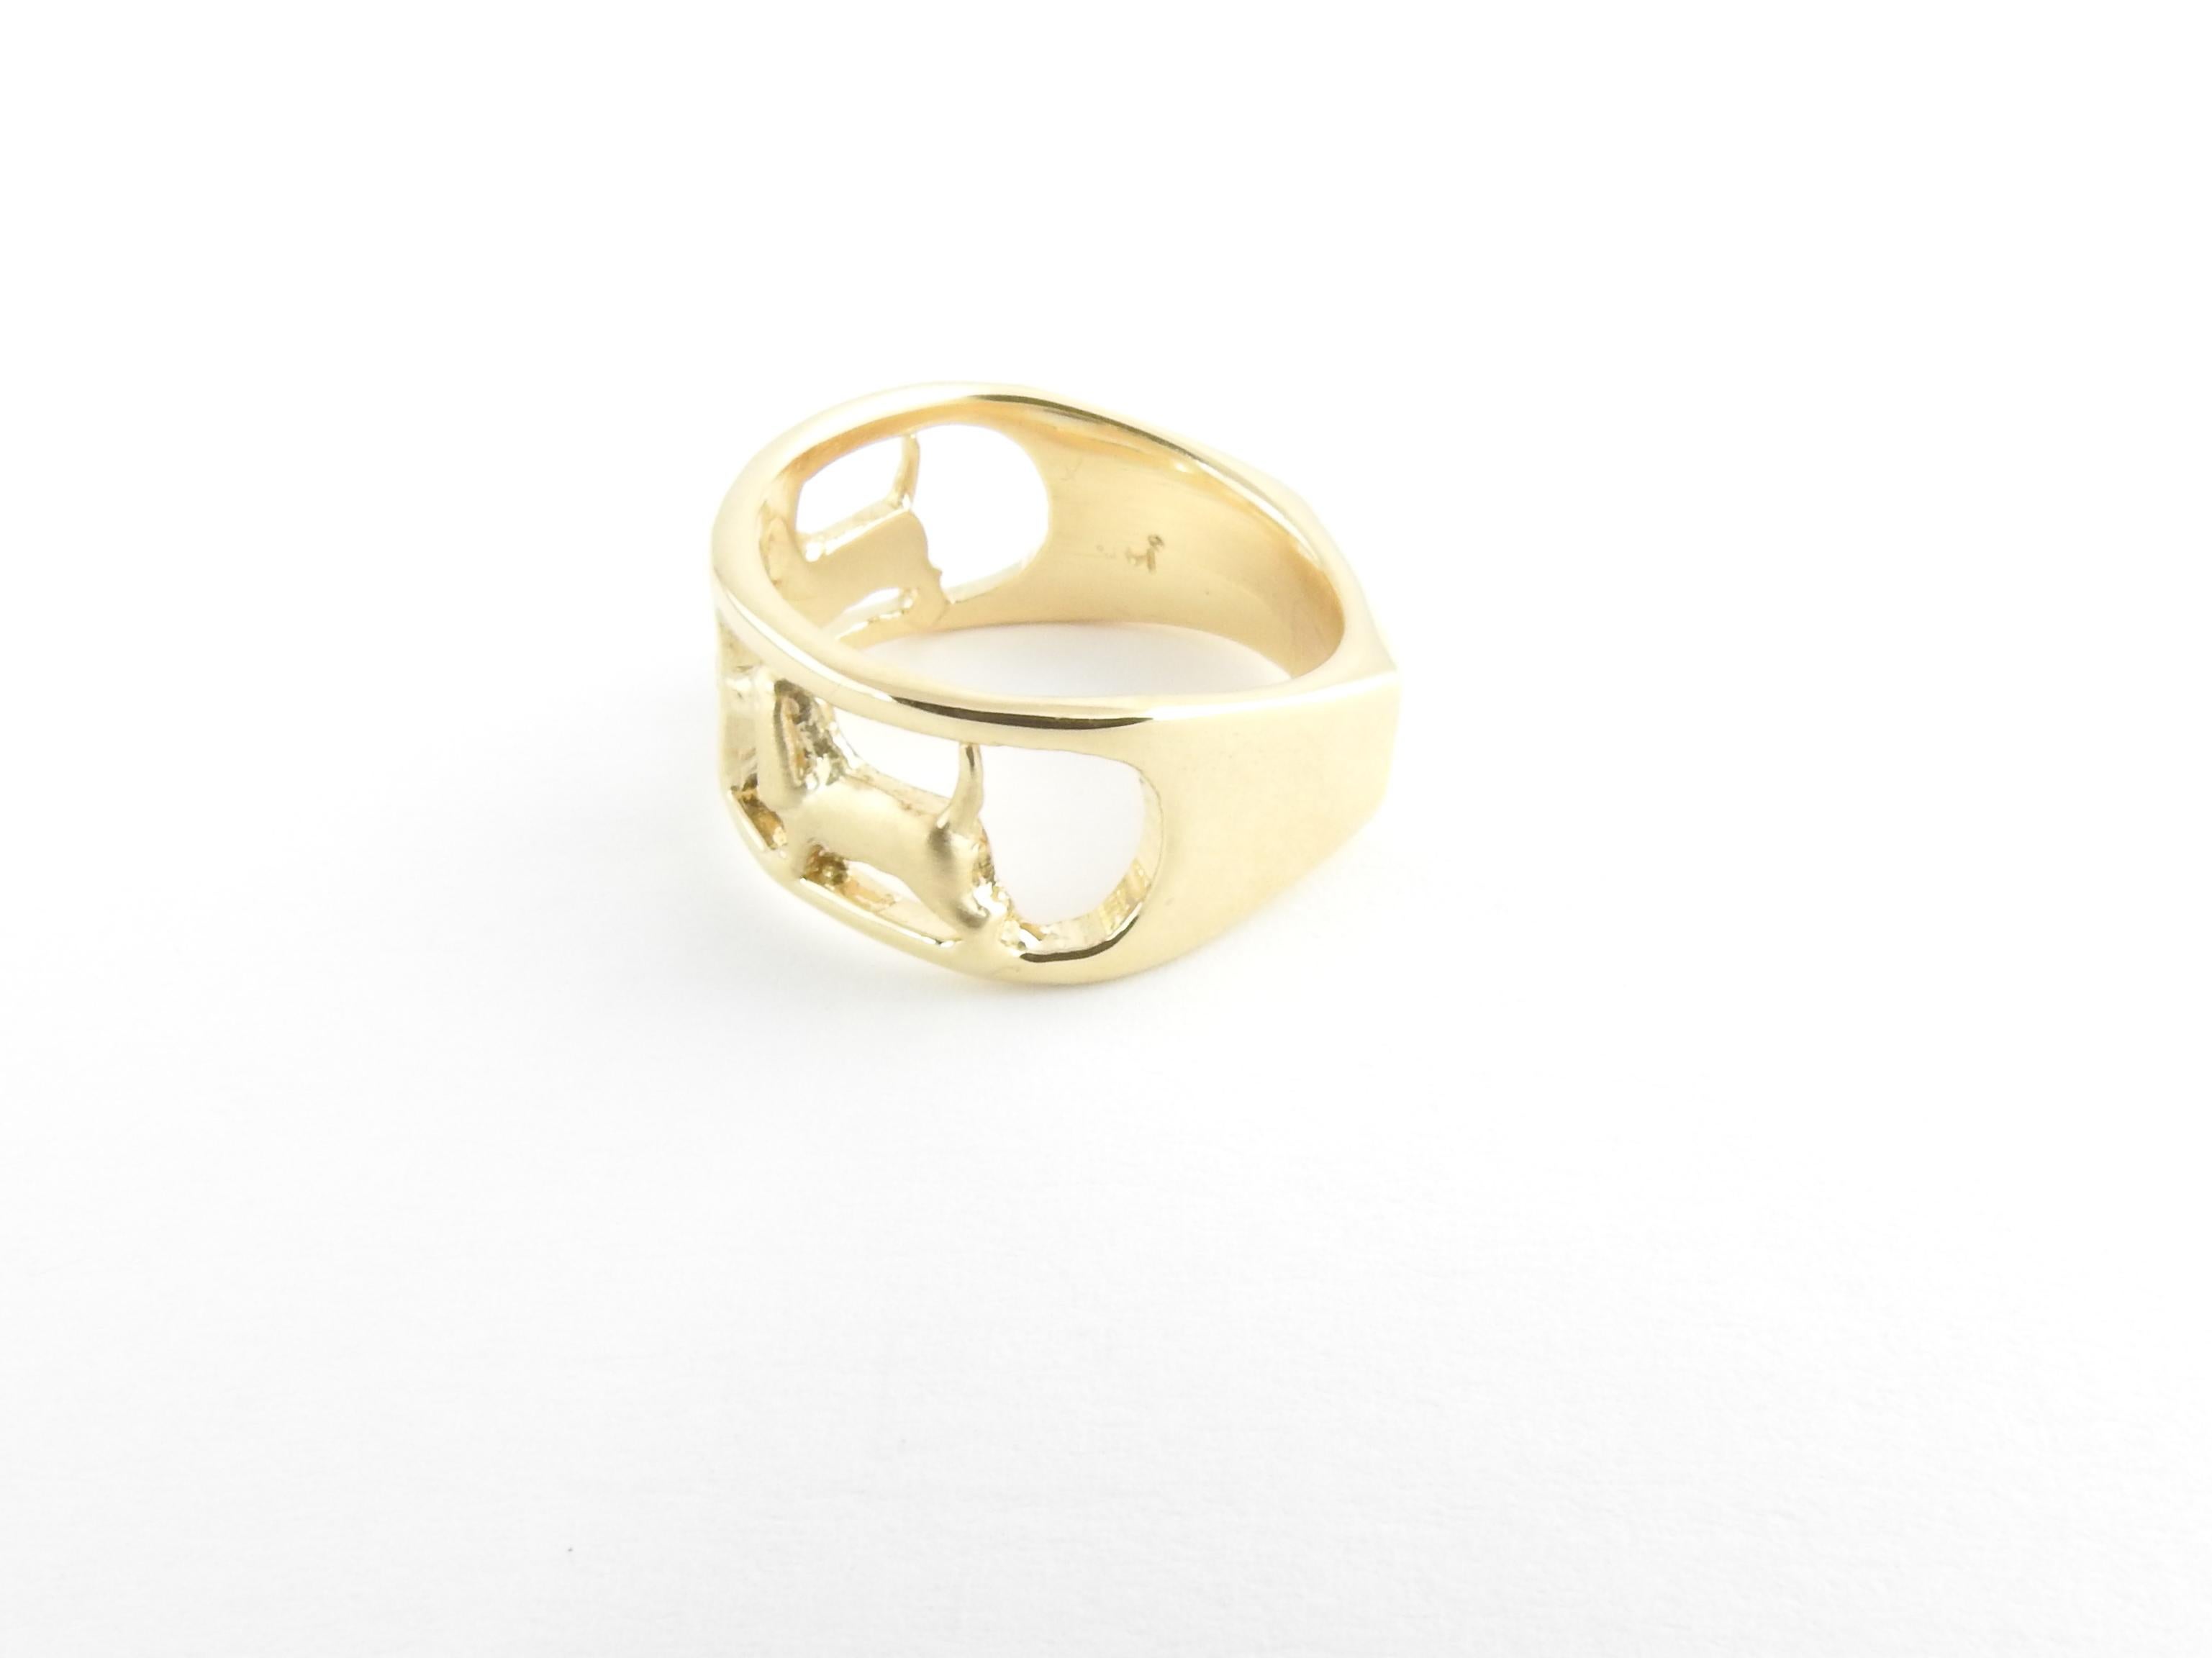 Vintage 14 Karat Yellow Gold and Diamond Dog Ring Size 6.5

This lovely band features two beautifully detailed dogs accented with three round brilliant cut diamonds set in classic 14K yellow gold. Width: 9 mm. Shank: 5 mm.

Approximate total diamond